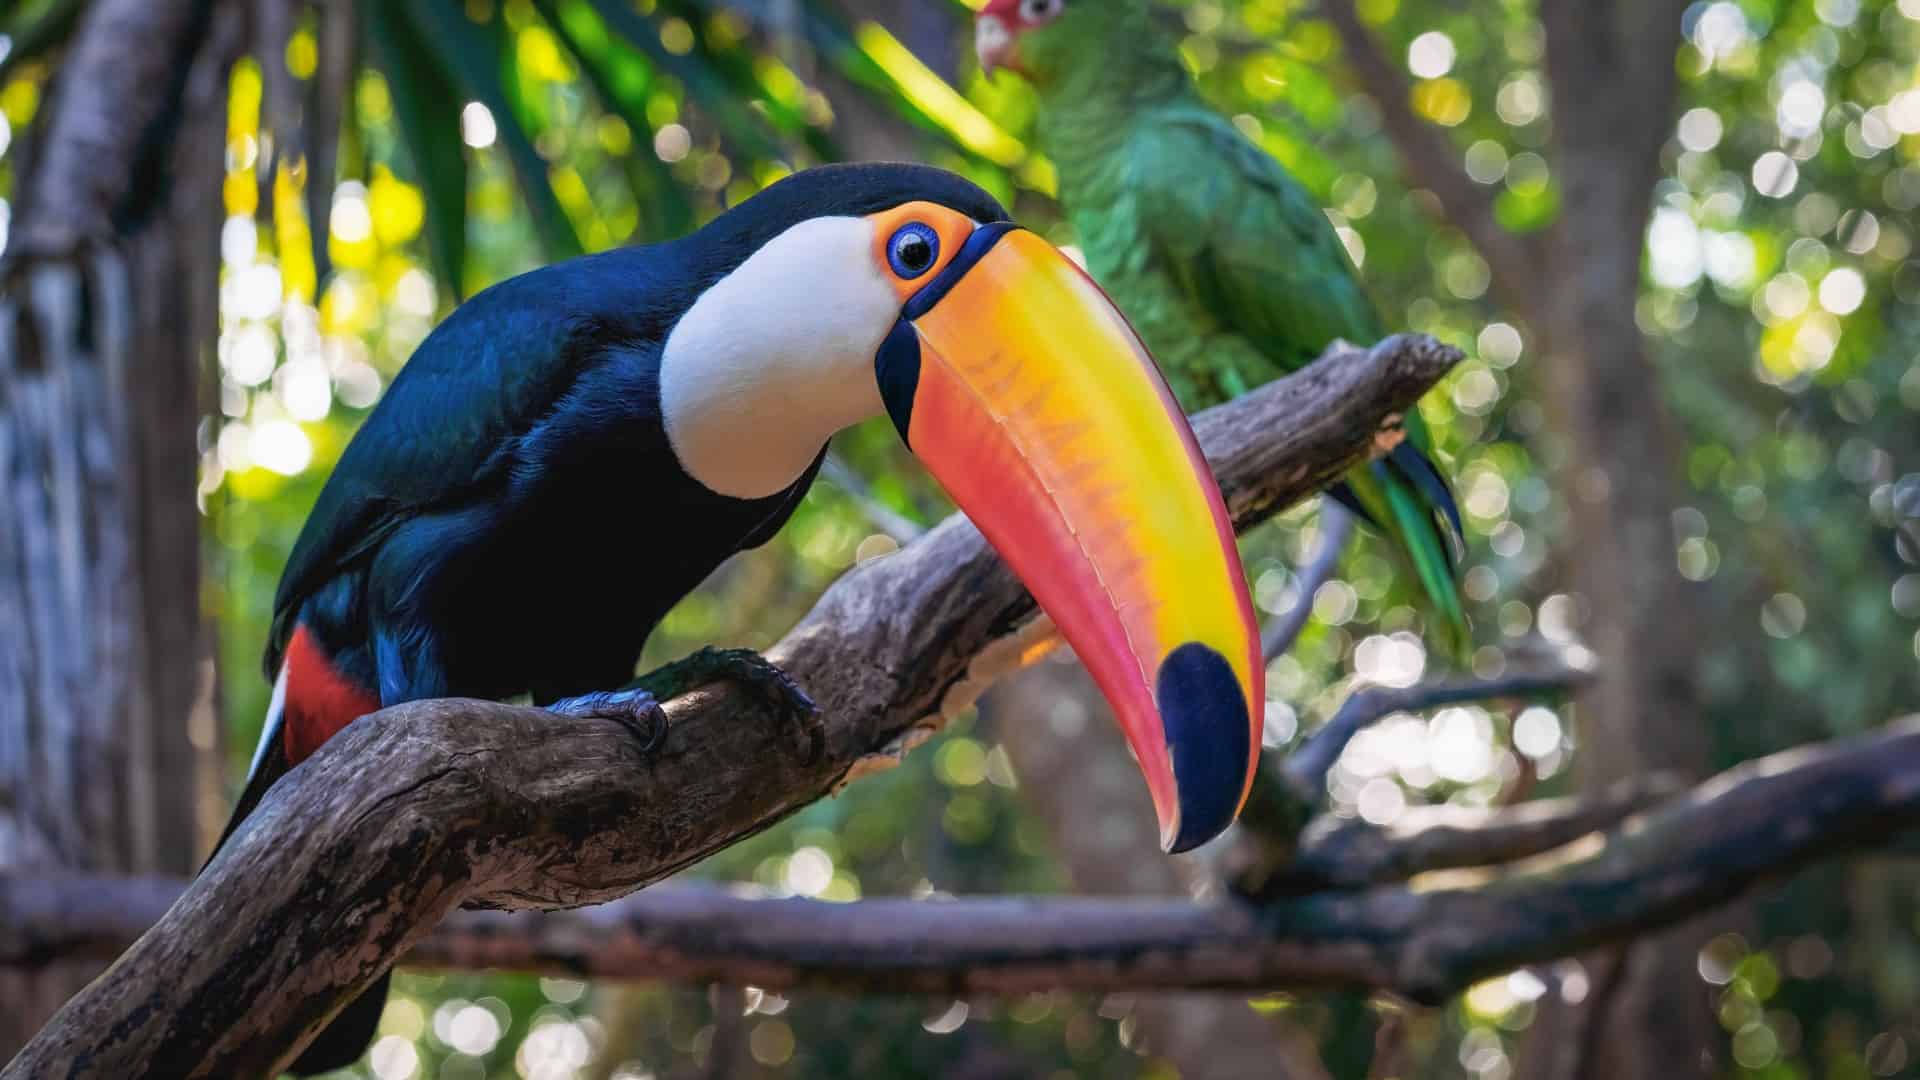 A vibrant Toucan perched on a tree branch in a lush forest, with its iconic orange, yellow, and black beak prominently displayed. In the softly blurred background, a green parrot can be seen.